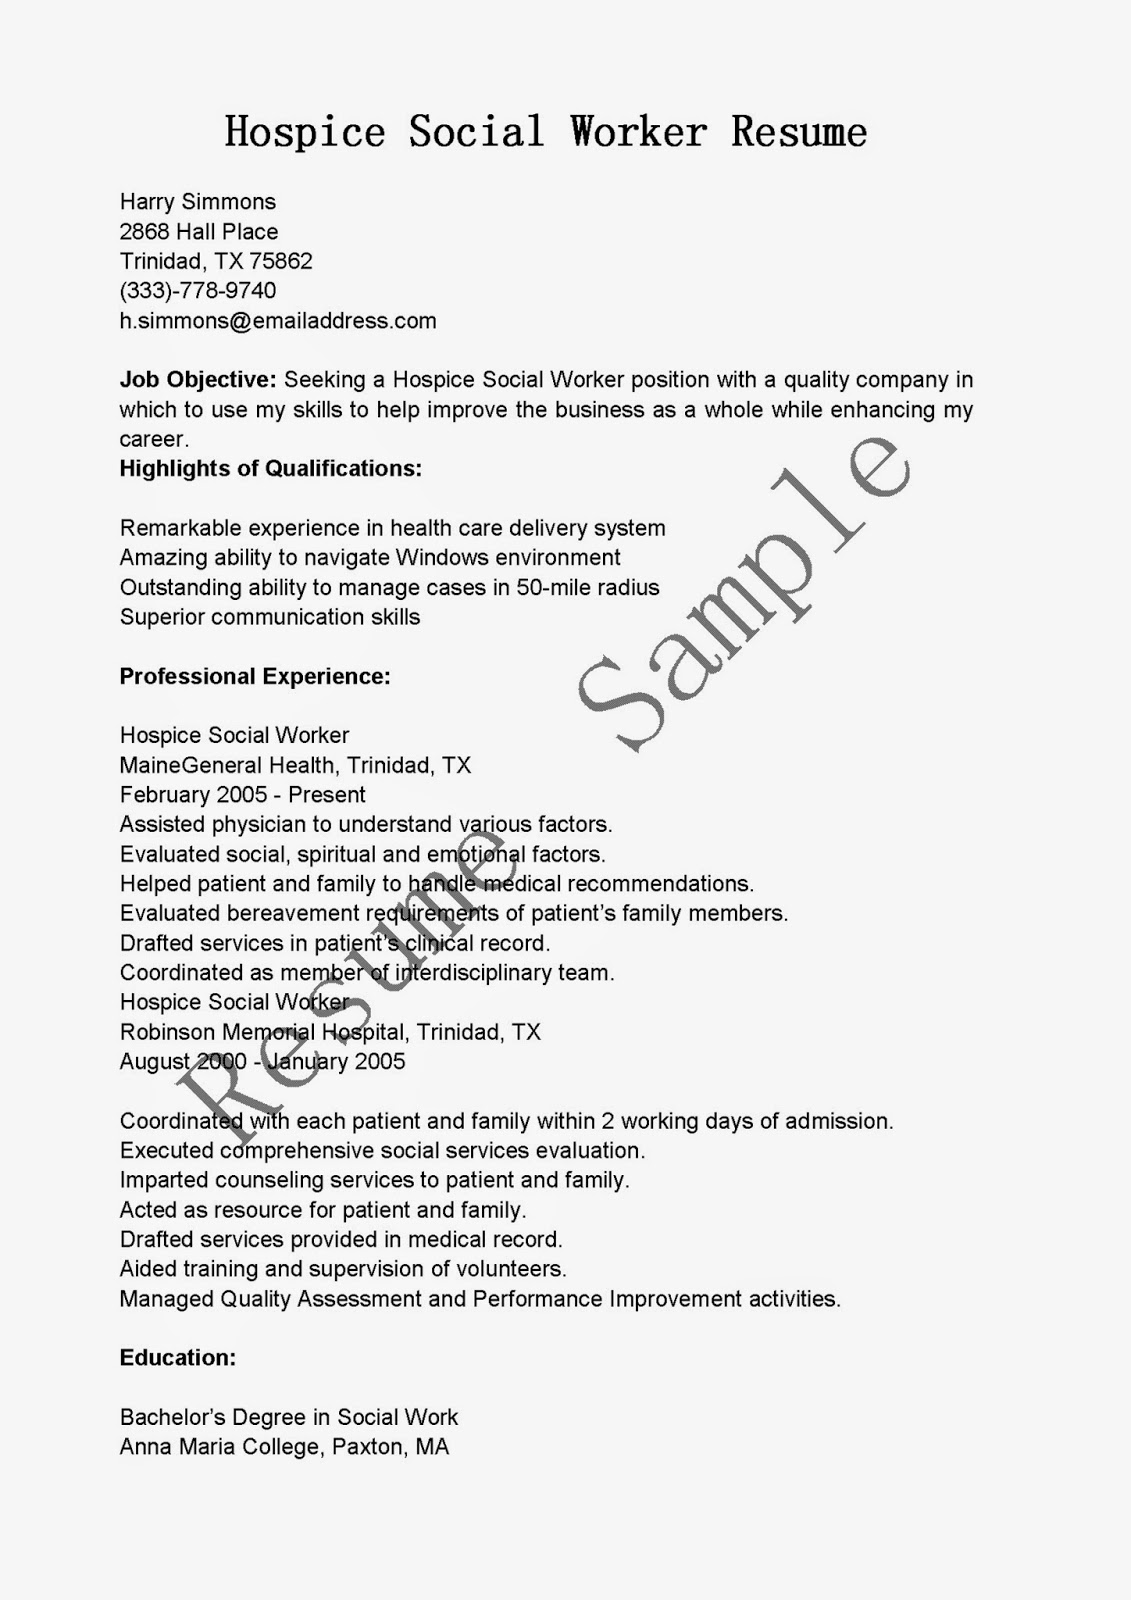 Resume designed by factory workers